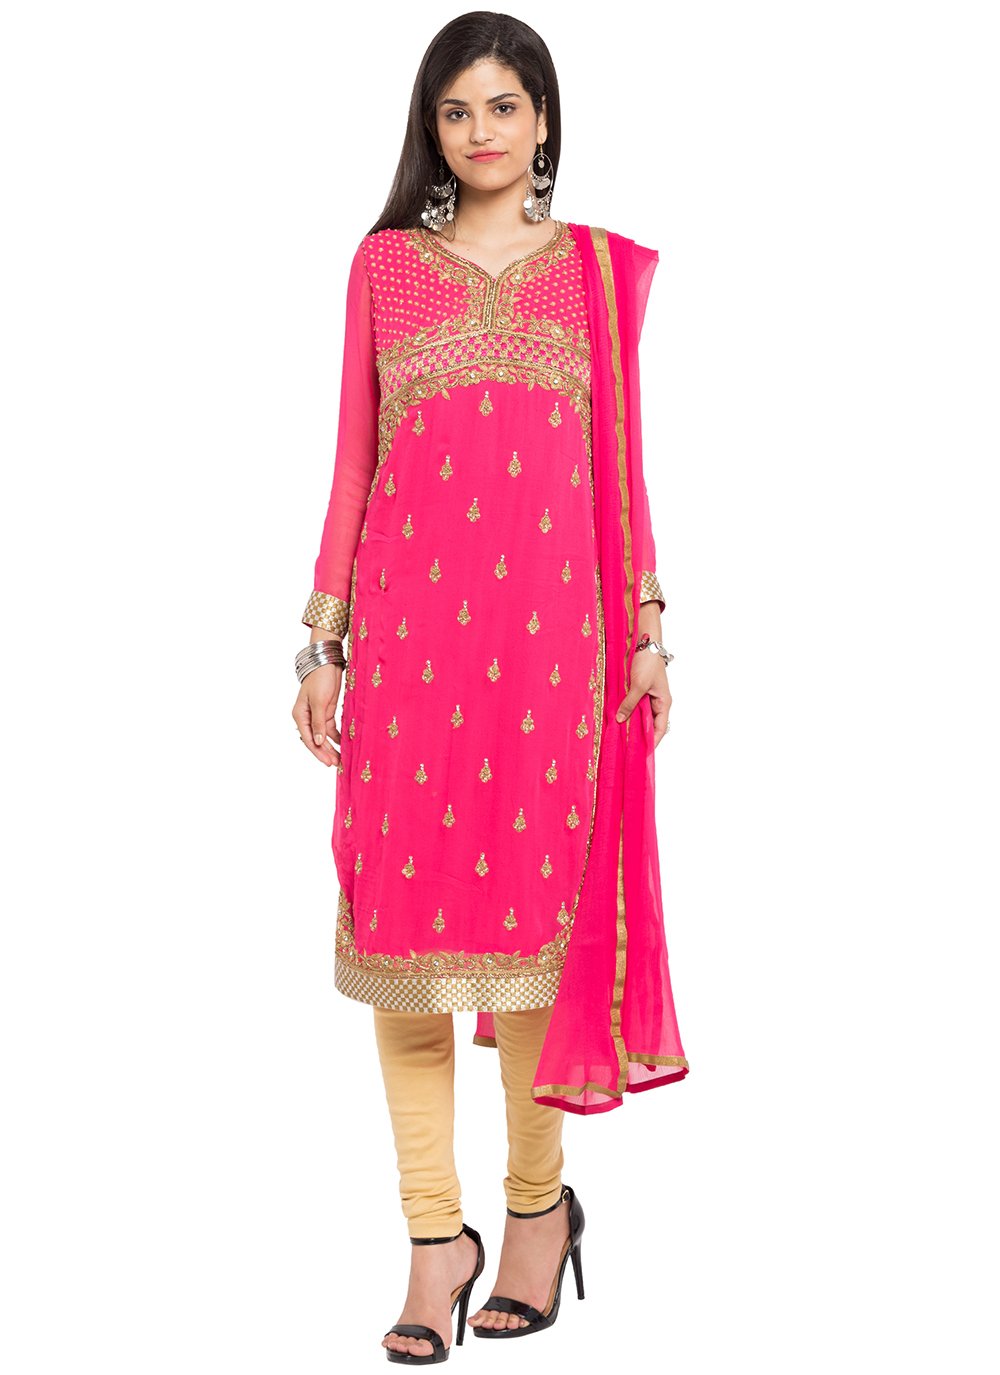 White And Pink Georgette Churidar Salwar Suit -